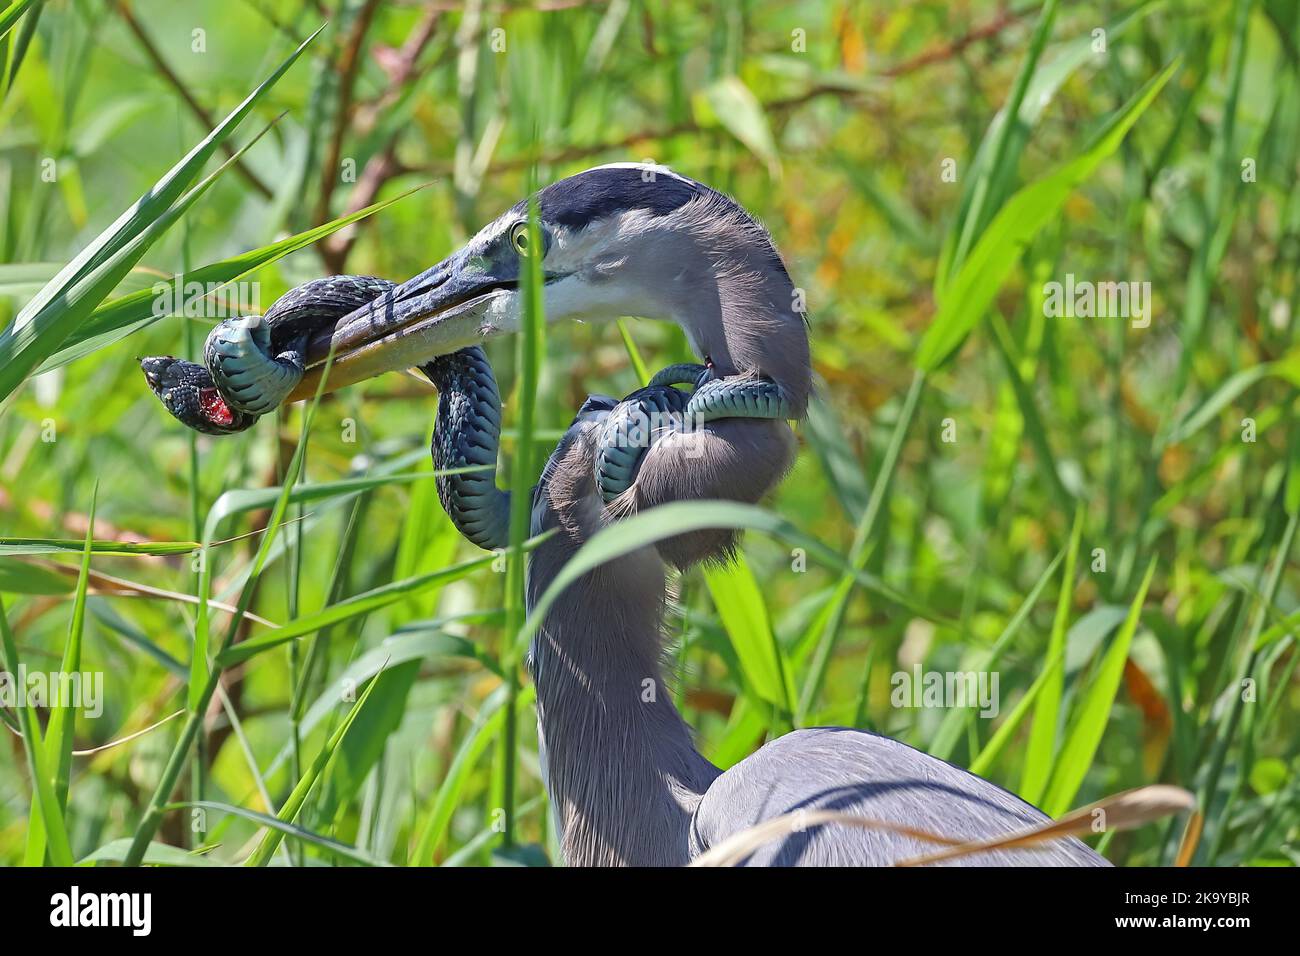 Great blue heron wrestling with snake in it's beak while the snake is wrapped around the herons neck. Stock Photo